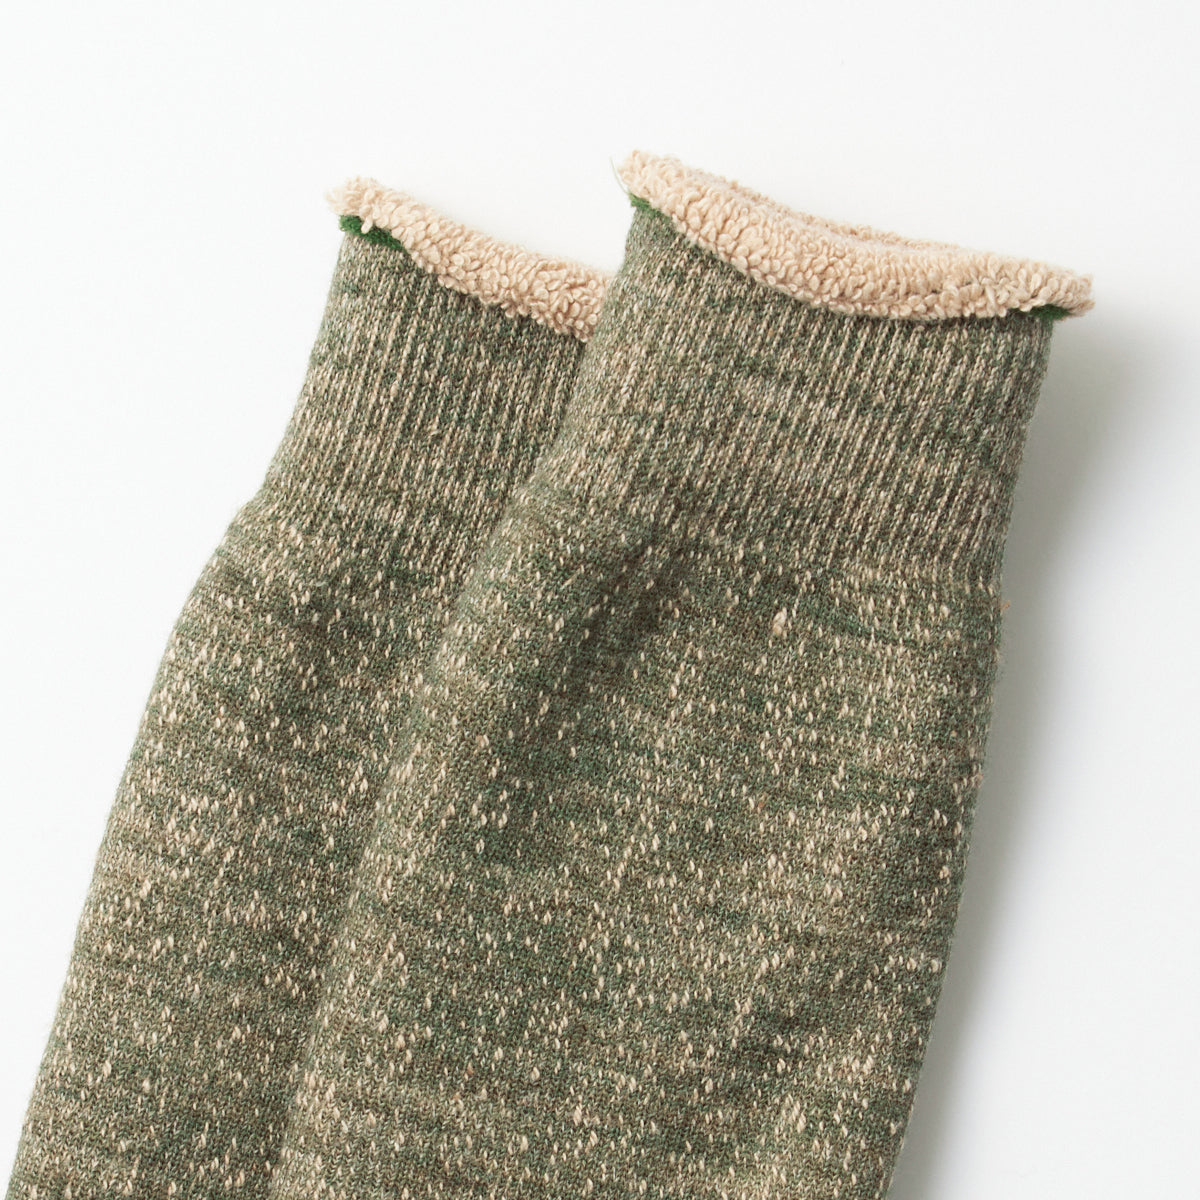 Double Face Crew Socks - Green/Brown